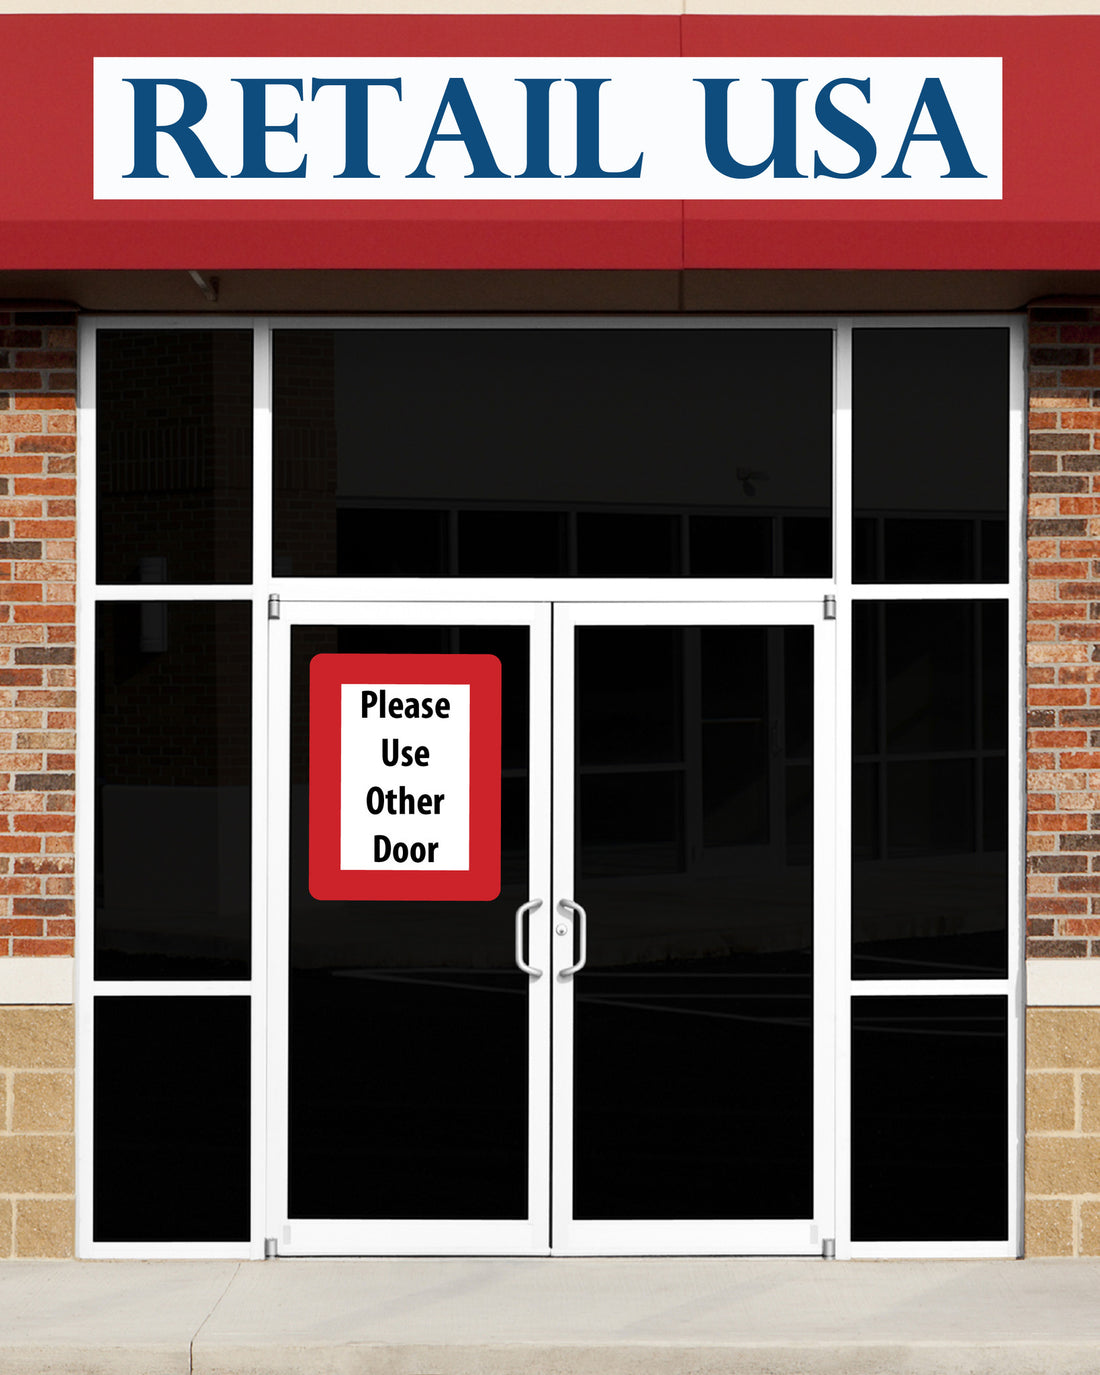 Exterior and Interior Signage for Retail Stores and Other Businesses